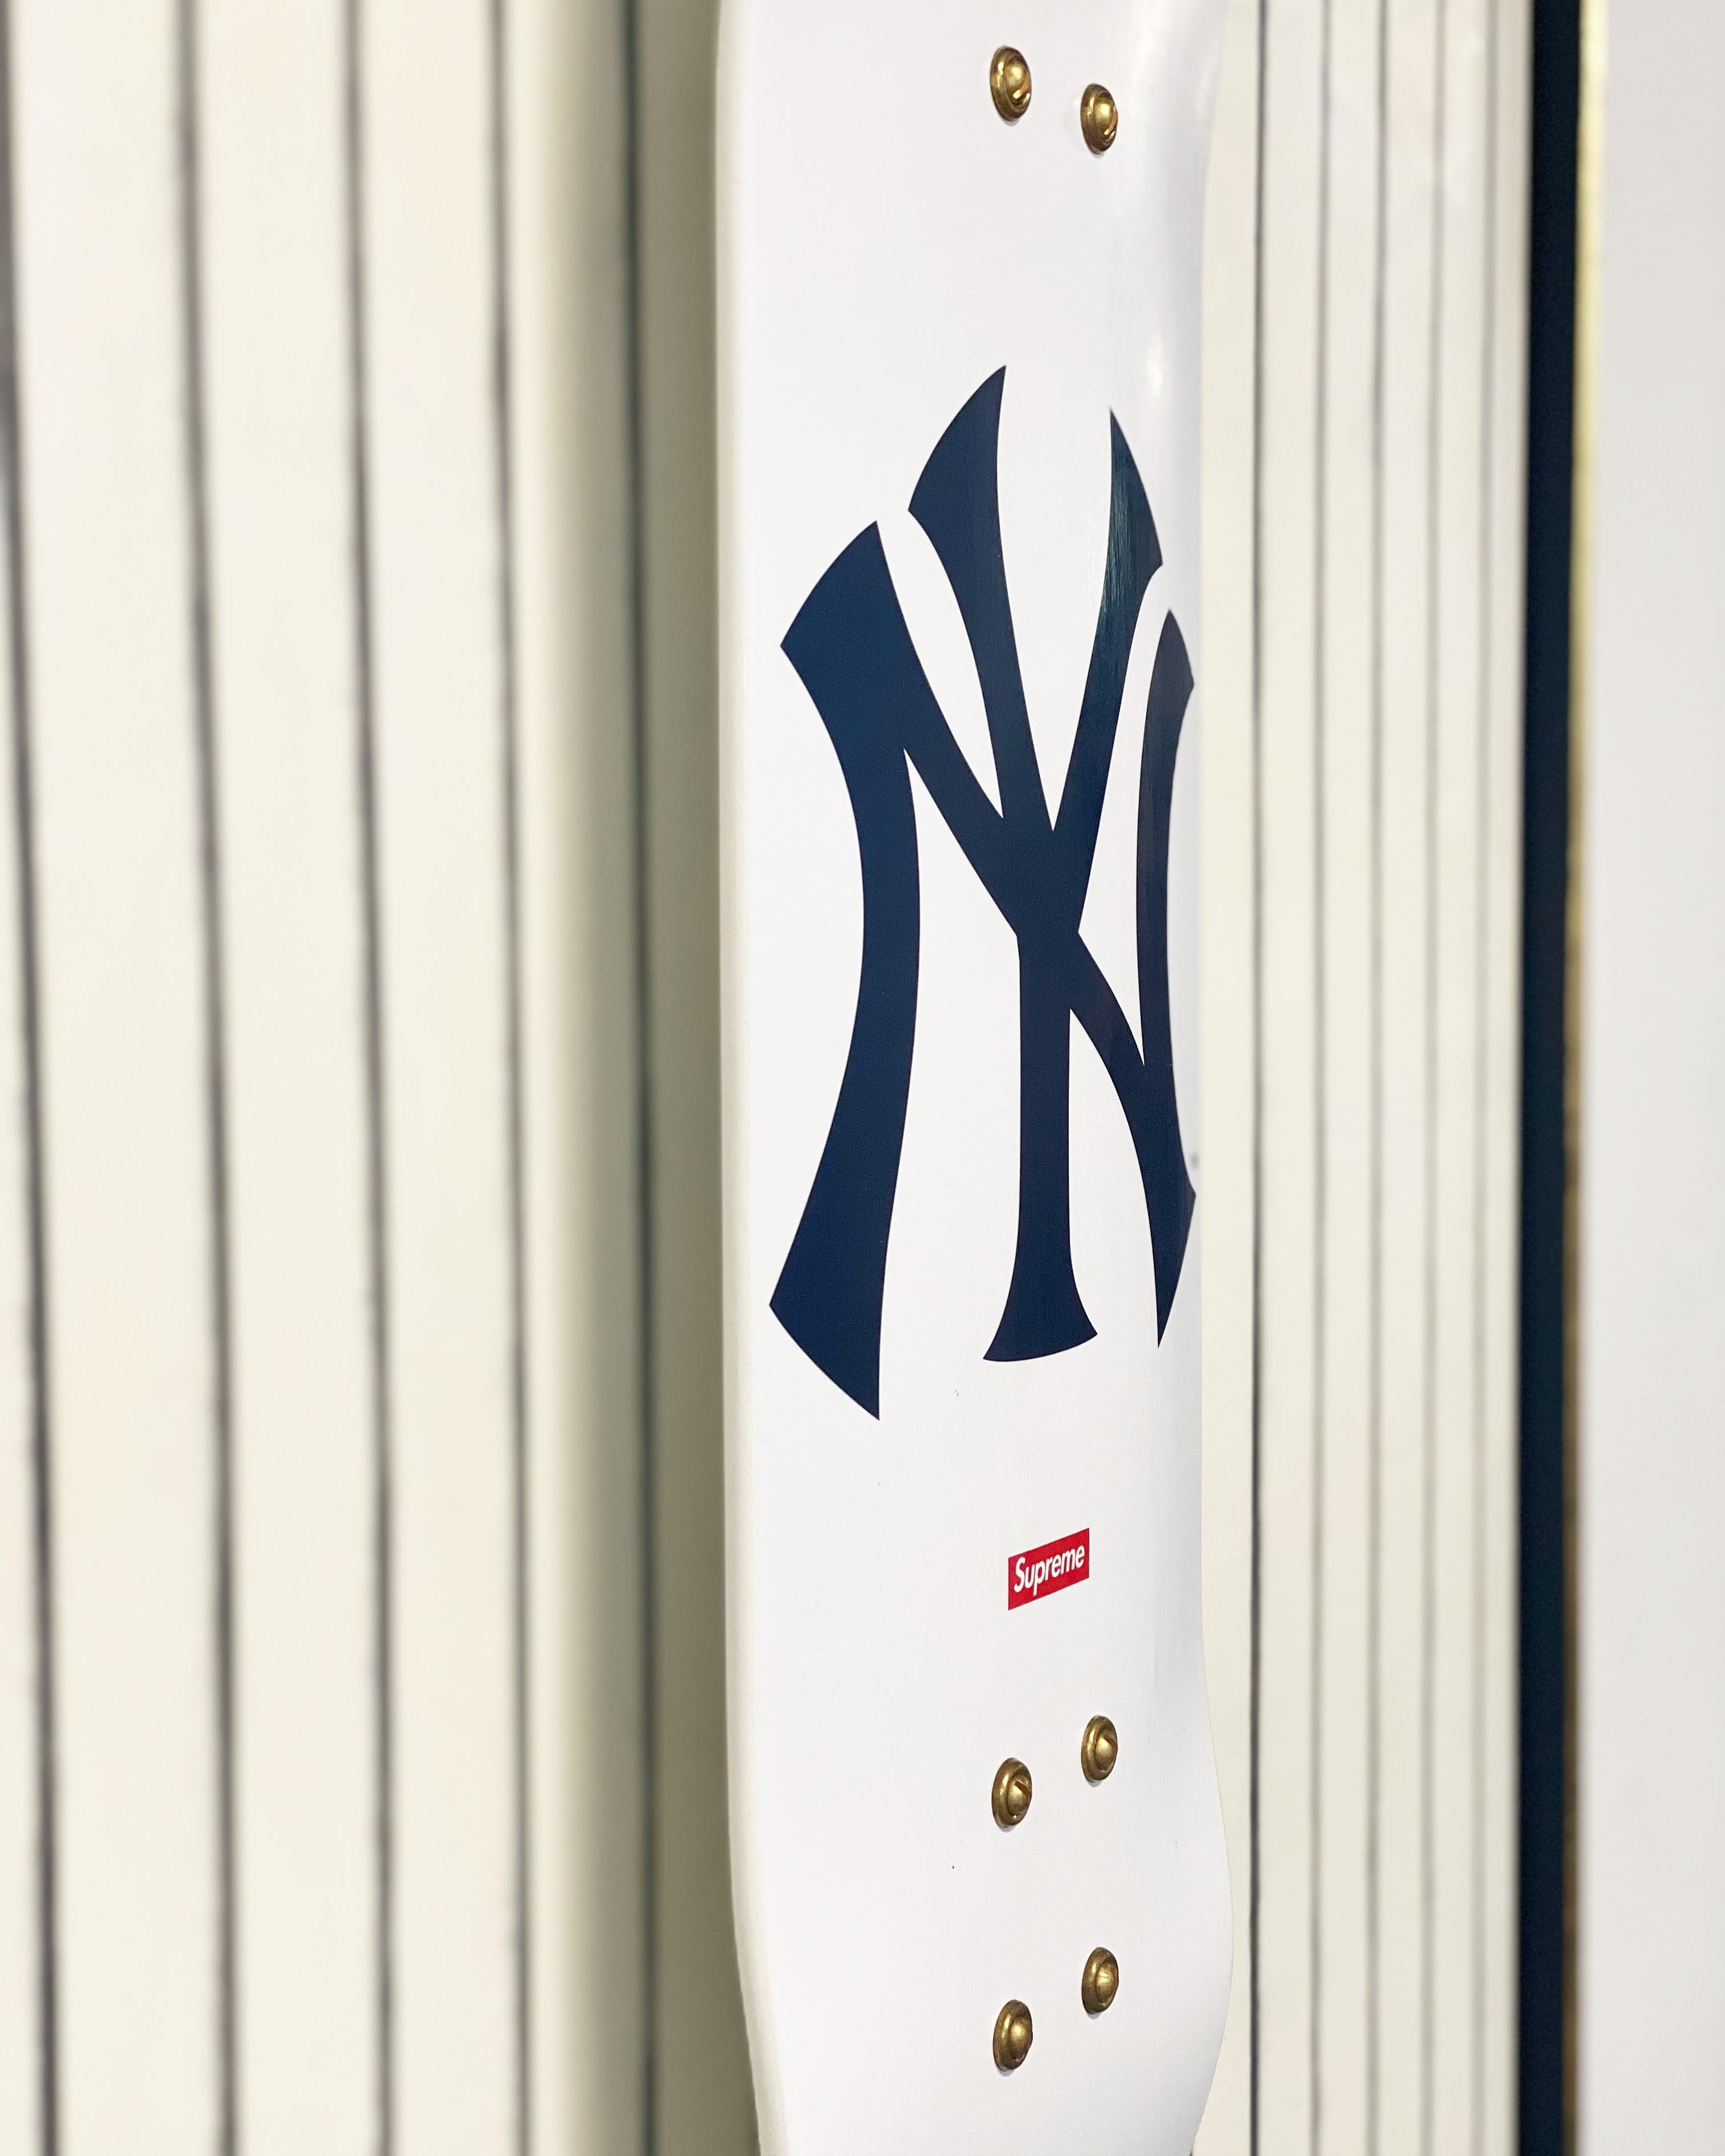 The Deck series. Screen-printed maple skate deck. Float-mounted on encaustic painted board.This skate deck was designed by streetwear label, Supreme, in collaboration with the New York Yankees.

Art Dimensions: 36 x 48 H inches
Framed Dimensions: